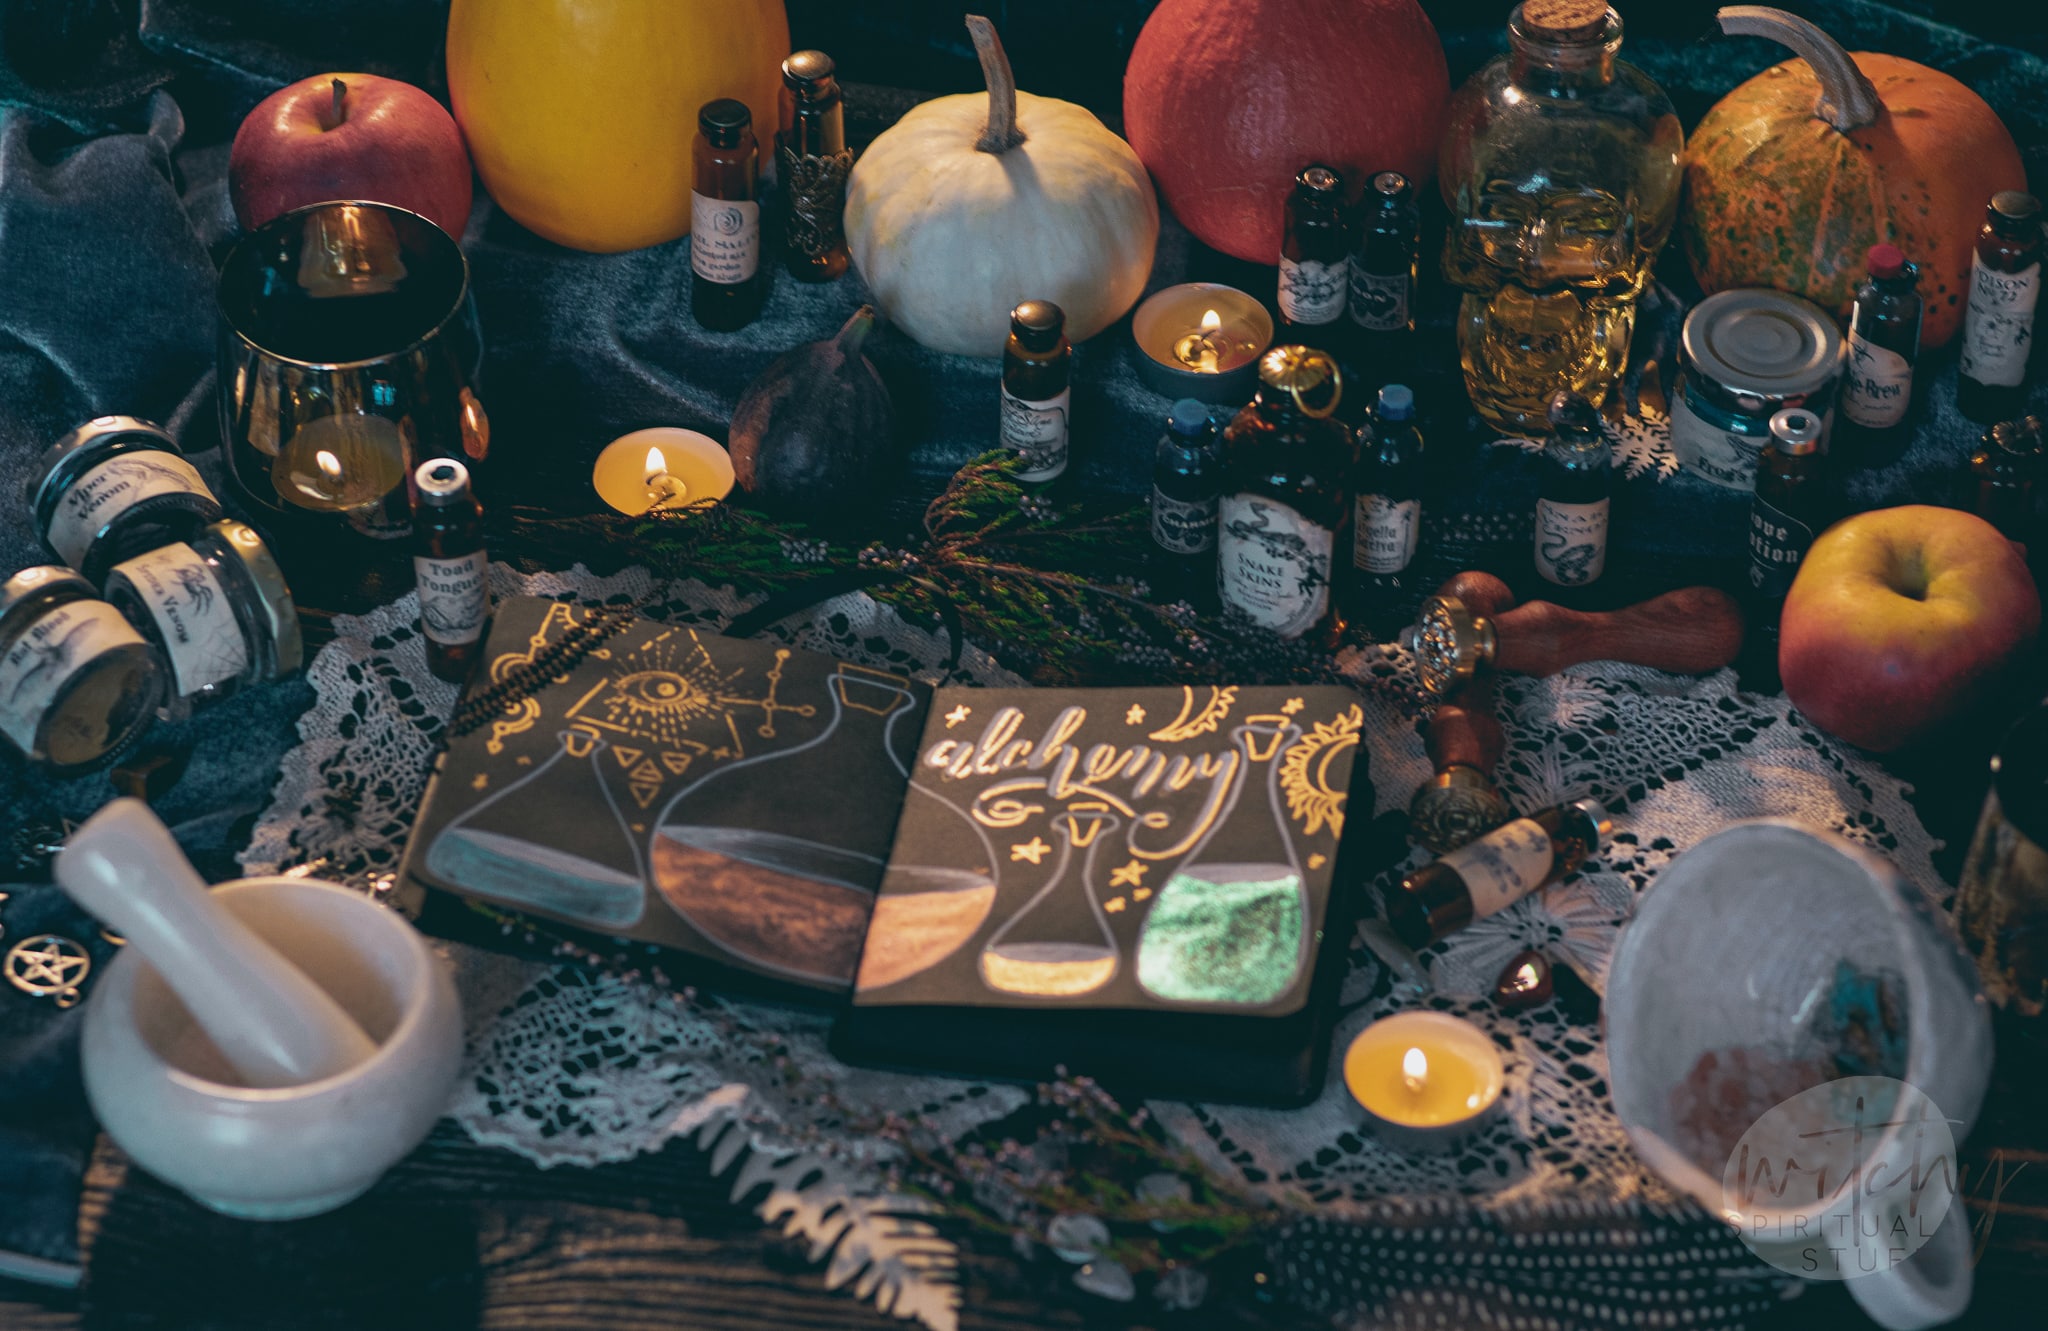 Do Witchcraft Spells Really Work? Yes. But You Should Be Careful